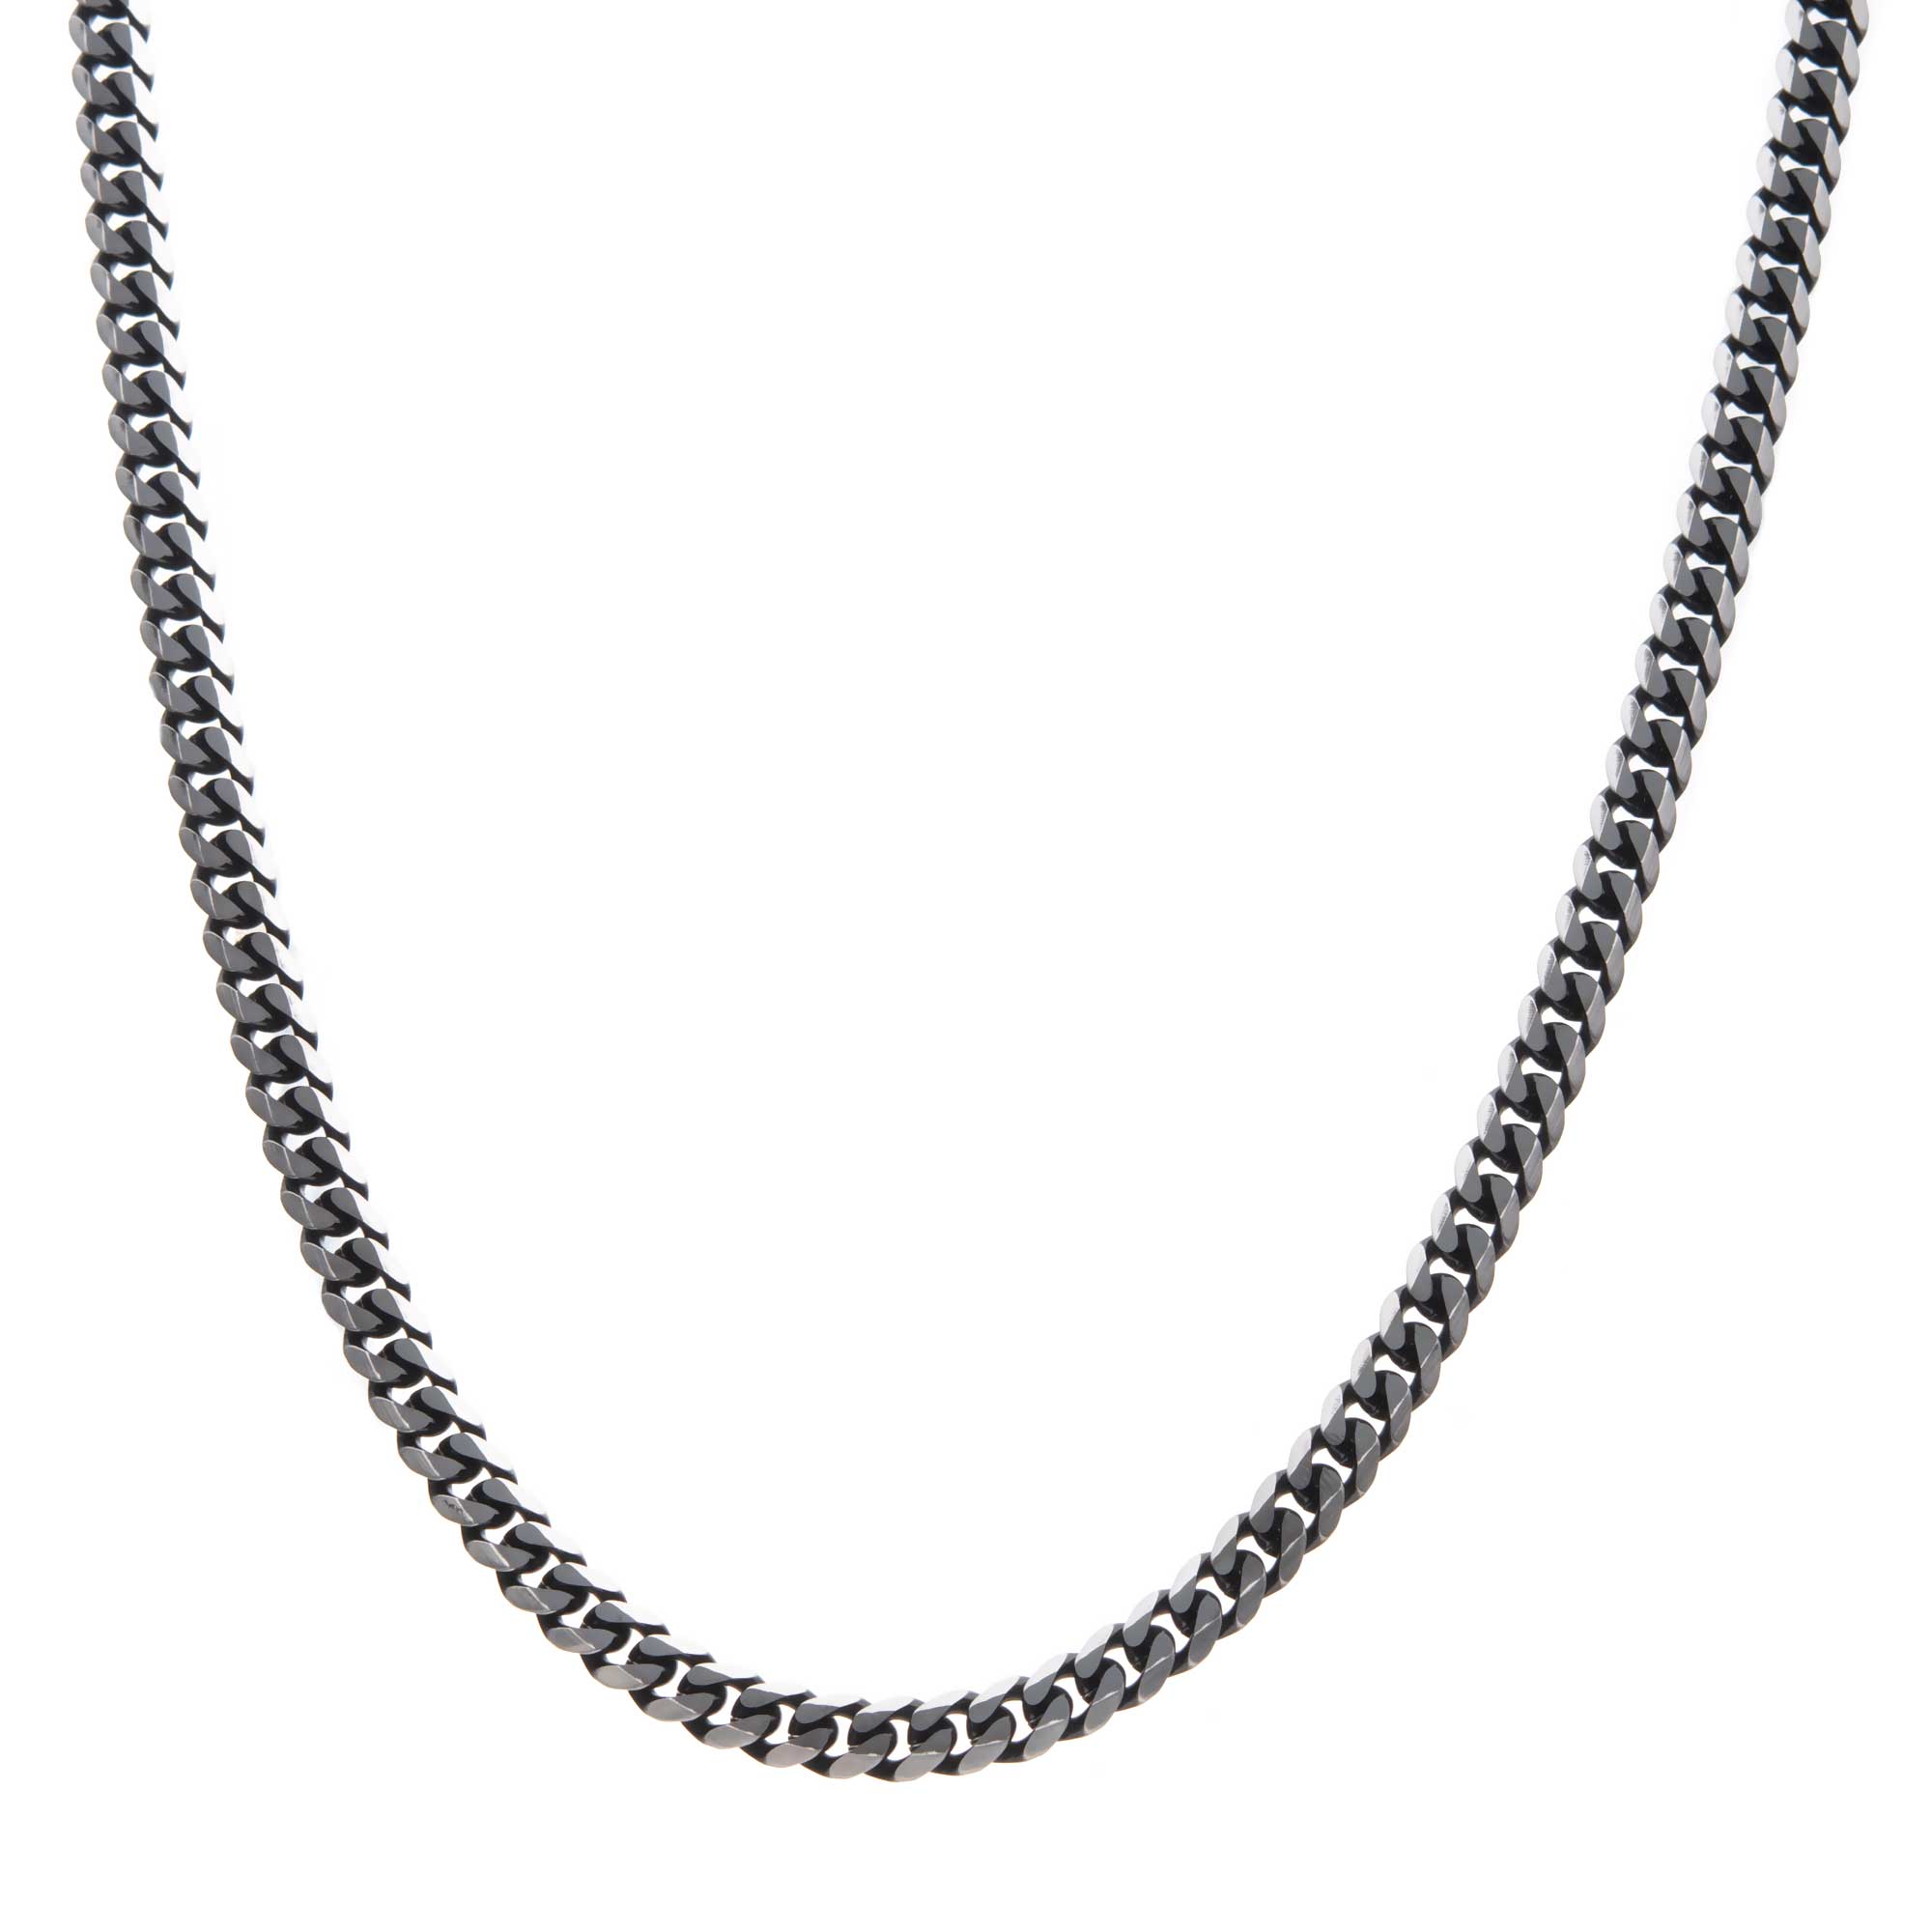 Stainless Steel Black Plated 8mm Diamond Curb Chain Image 2 P.K. Bennett Jewelers Mundelein, IL